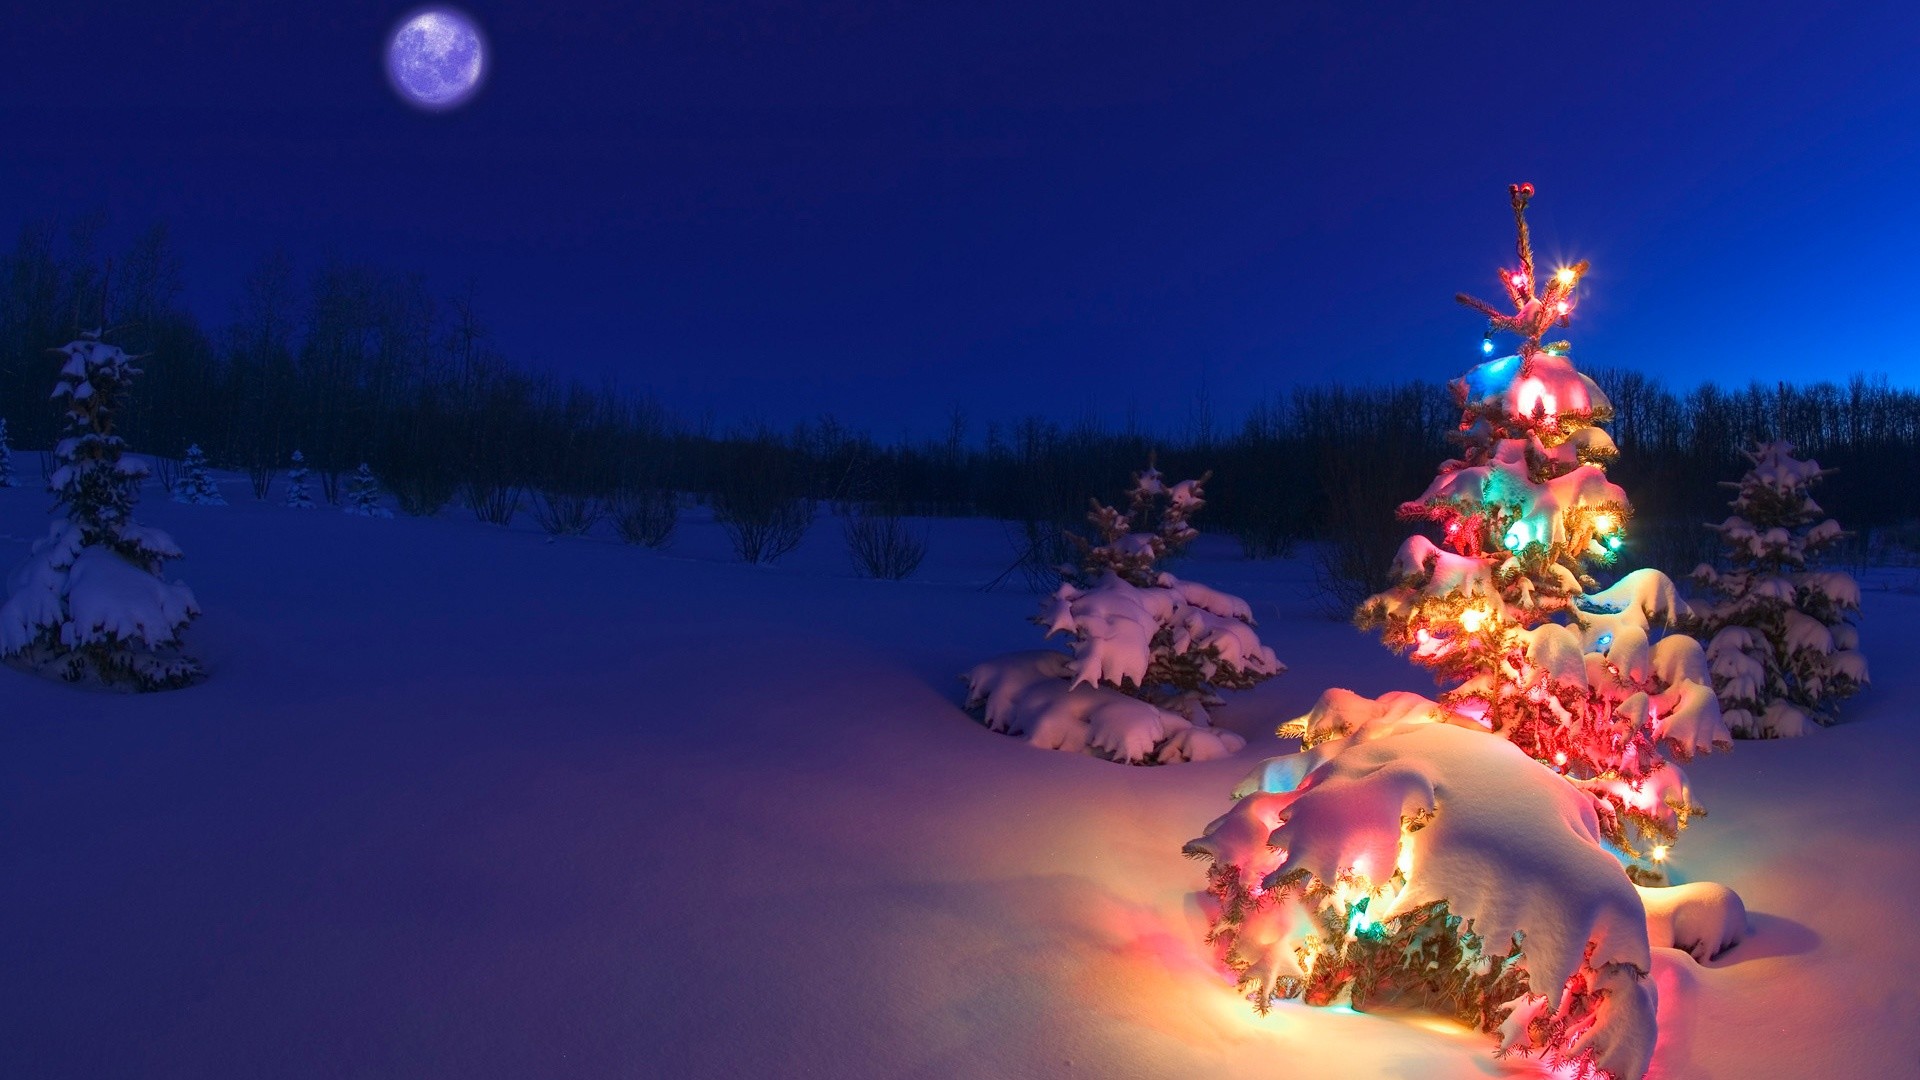 Download Merry Christmas HD Image ‚· Merry Christmas hd Wallpapers